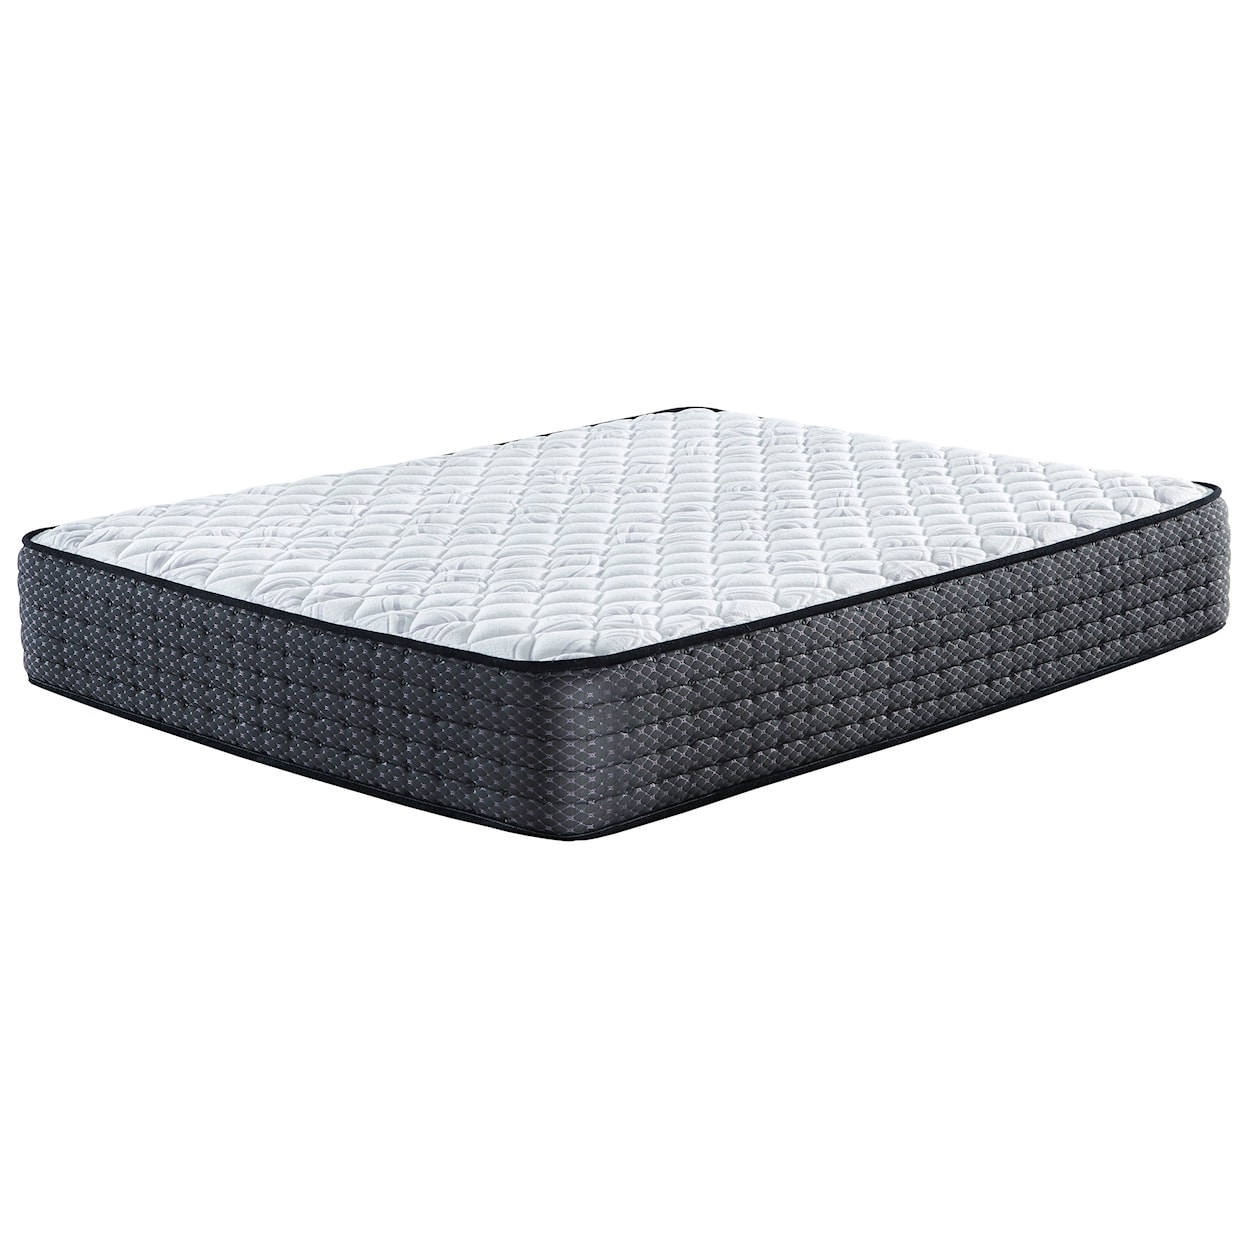 Sierra Sleep M625 Limited Edition Firm King 13" Firm Mattress and Foundation